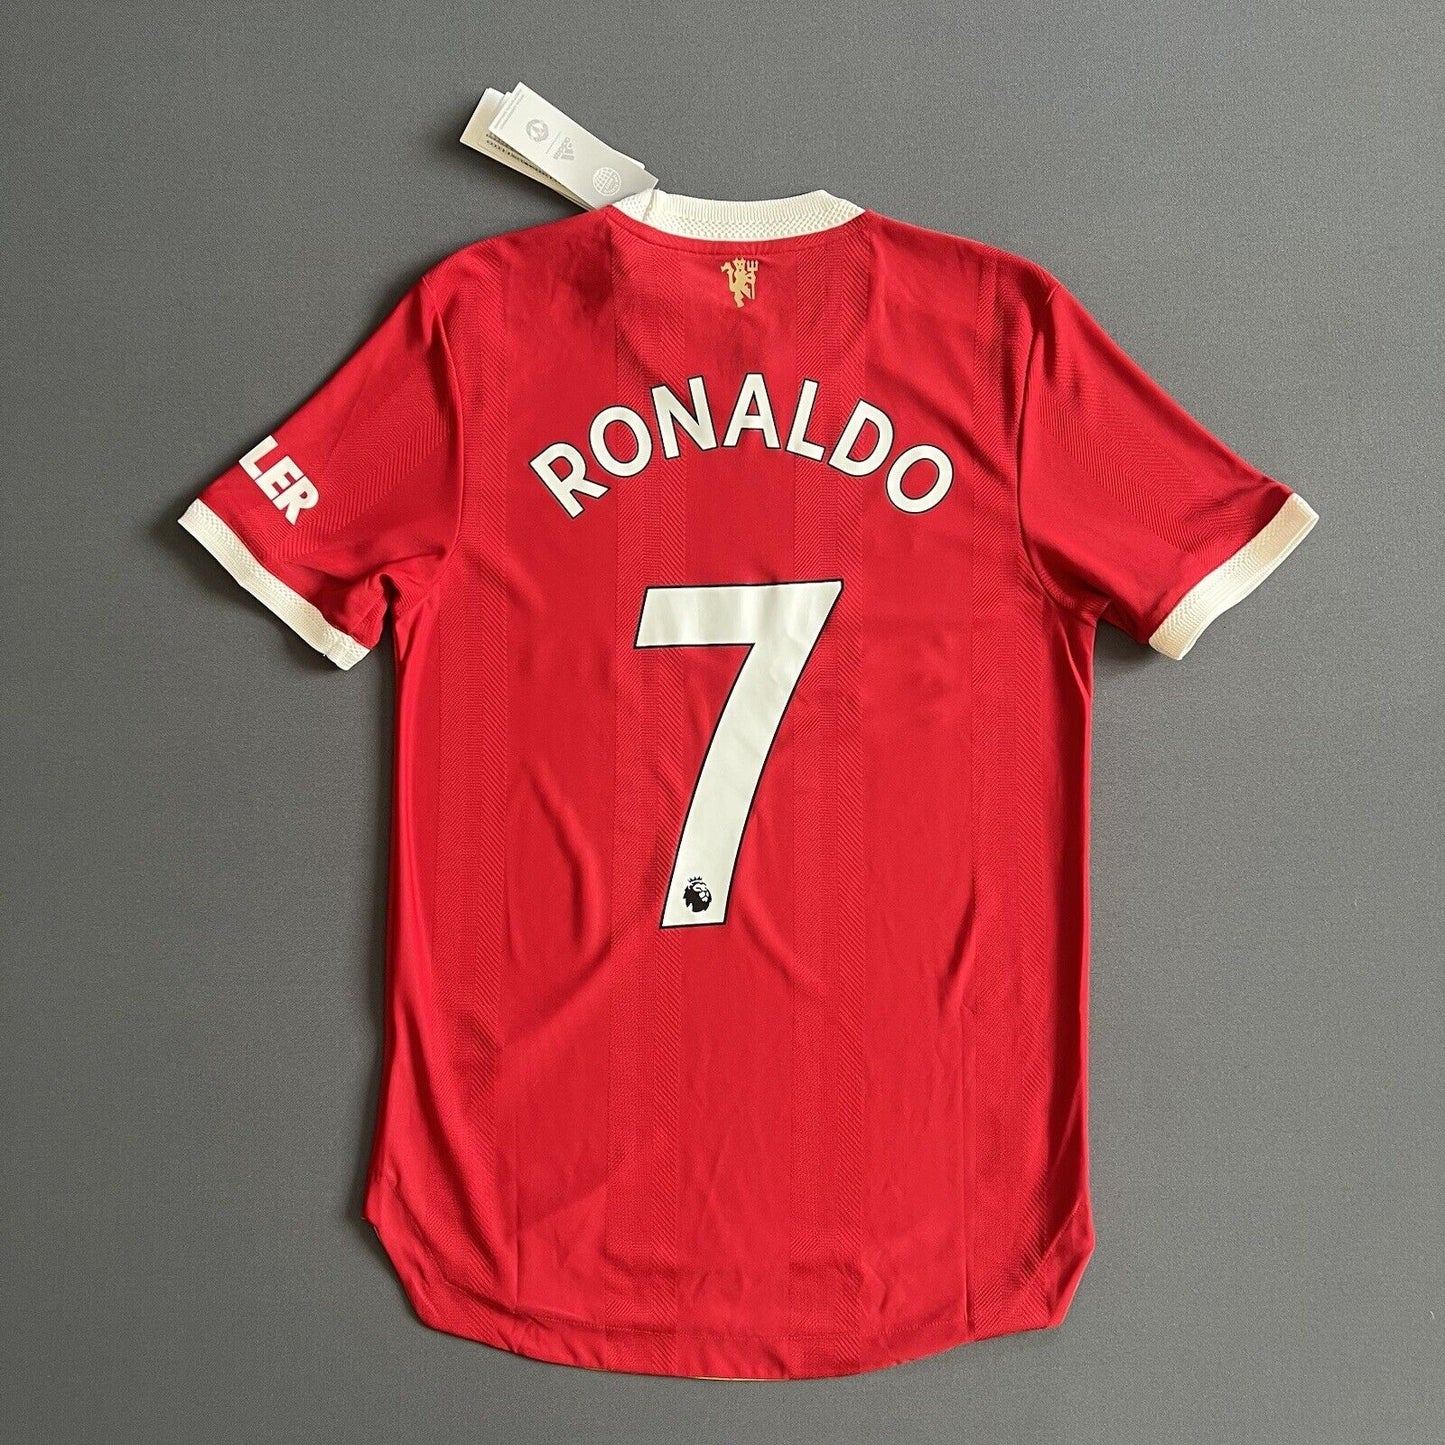 Cristiano Ronaldo Manchester United 2021/22 Season Home Kit Authentic Adidas On-Field Player Version Long Sleeve Jersey - Red